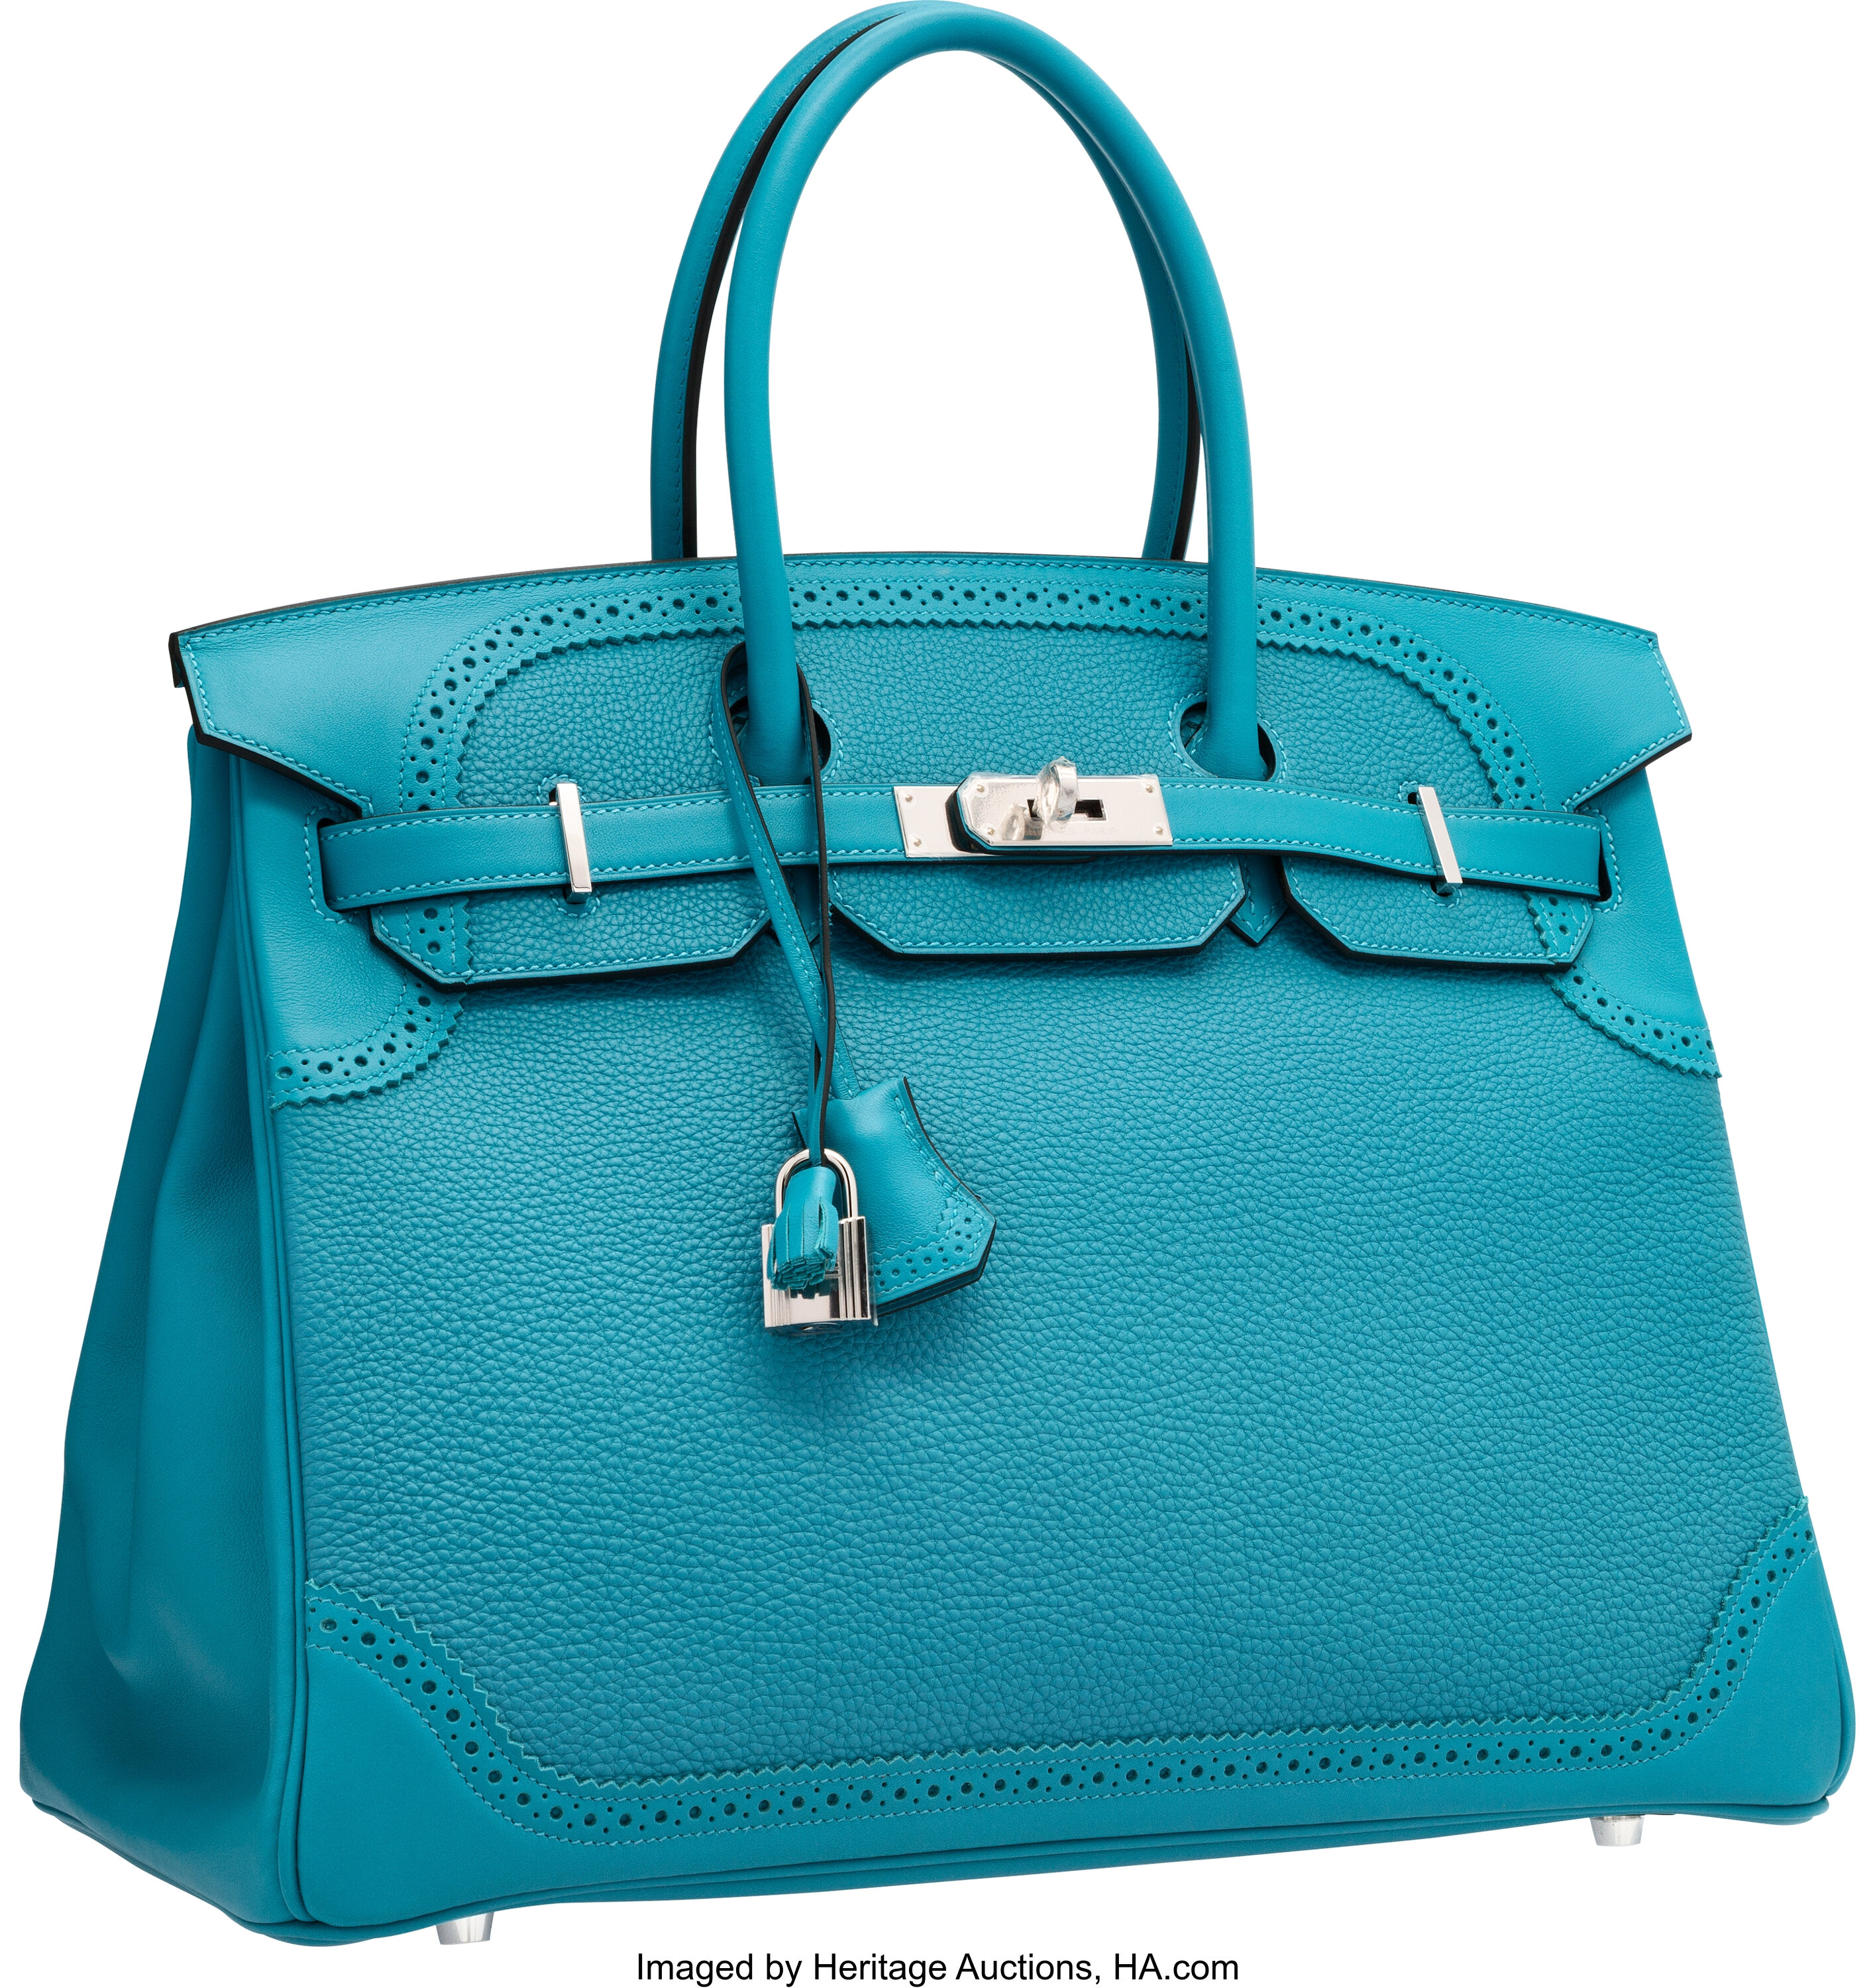 Hermès Limited Edition 30cm Turquoise Togo & Swift Leather Ghillies, Lot  #58114